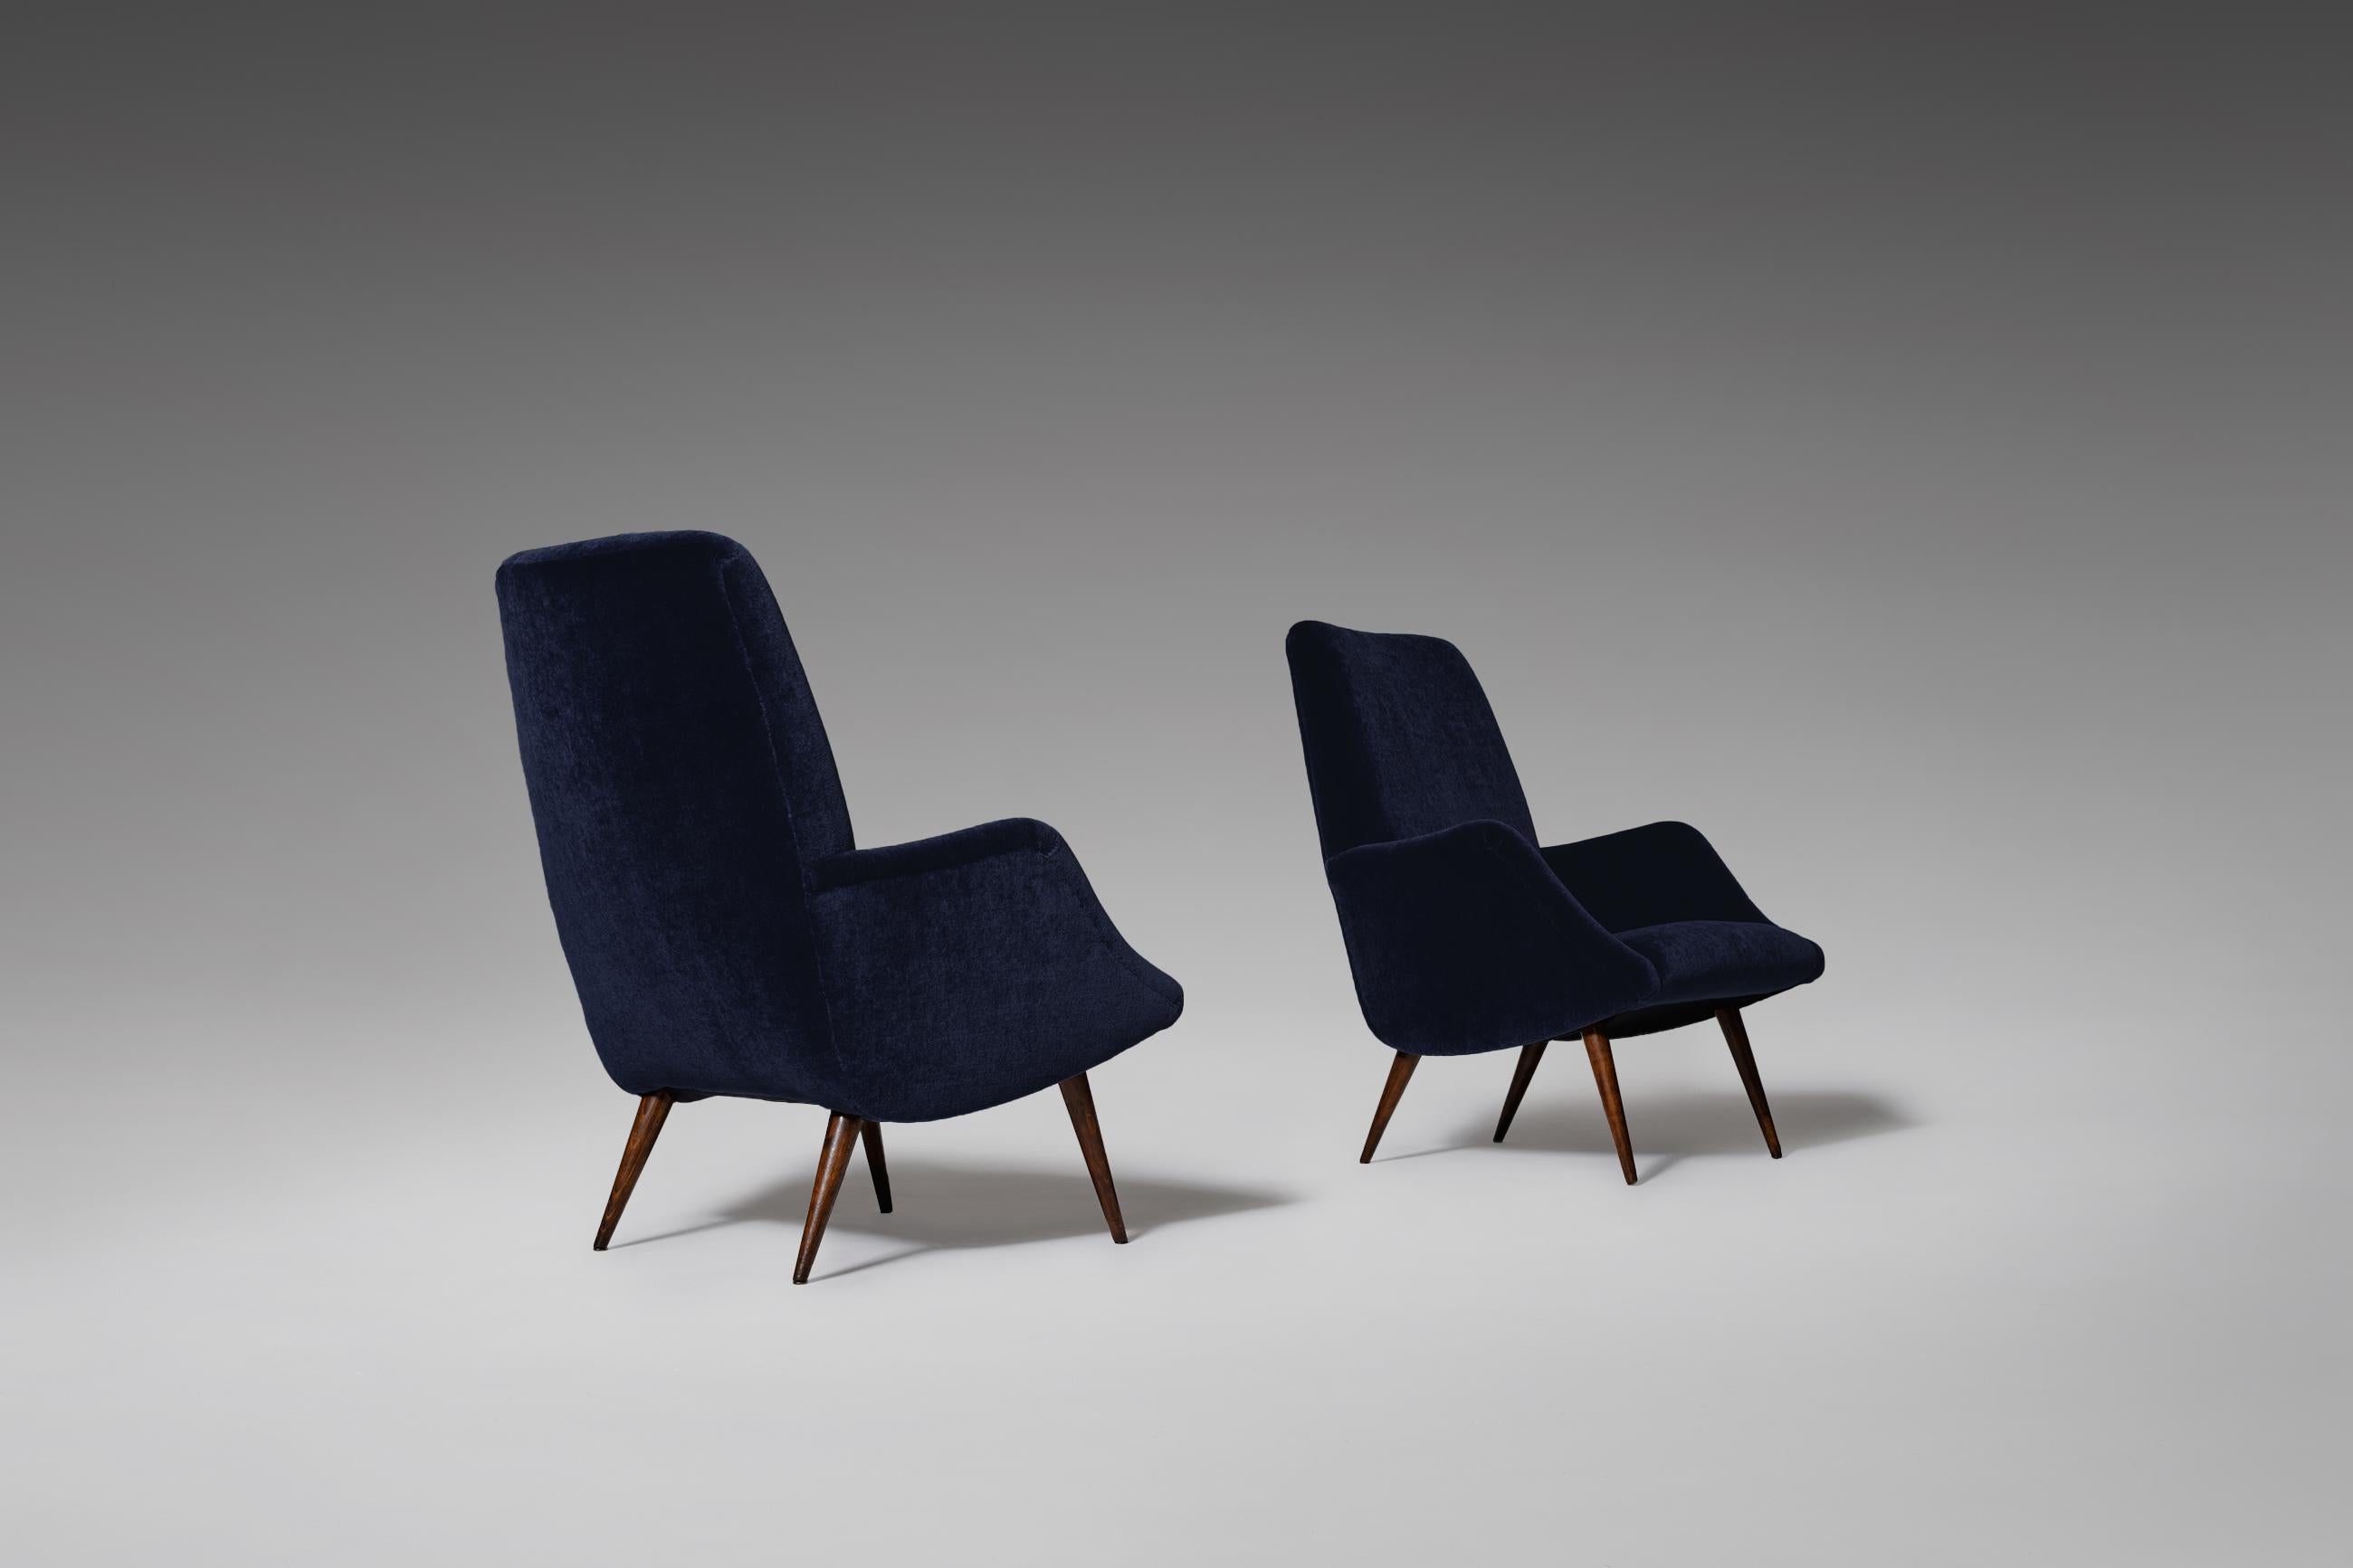 Beautiful pair of ‘806’ armchairs by Carlo de Carli for Cassina, Italy, 1955. Elegant curved shape with nice distinctive sharp tapered Italian walnut wooden legs. The chairs are fully reconditioned and are upholstered in a high quality night blue